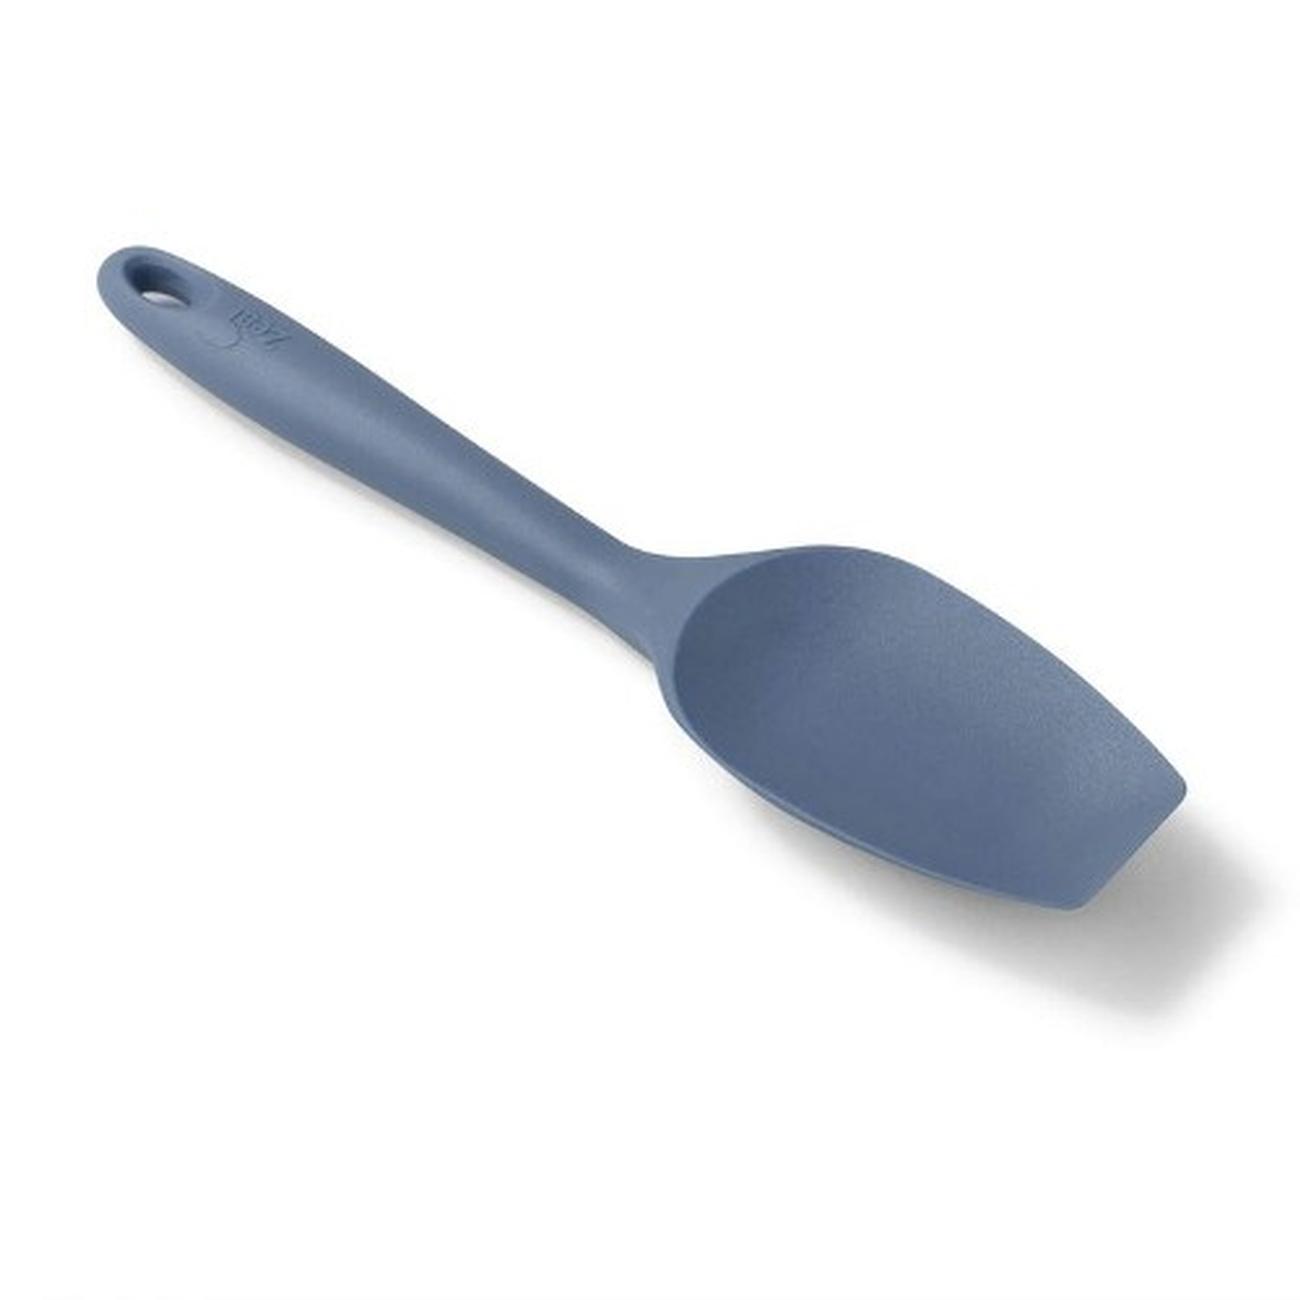 zeal-silicone-spatula-spoon-provence-blue - Zeal Silicone Spatula Spoon Provence Blue 26cm